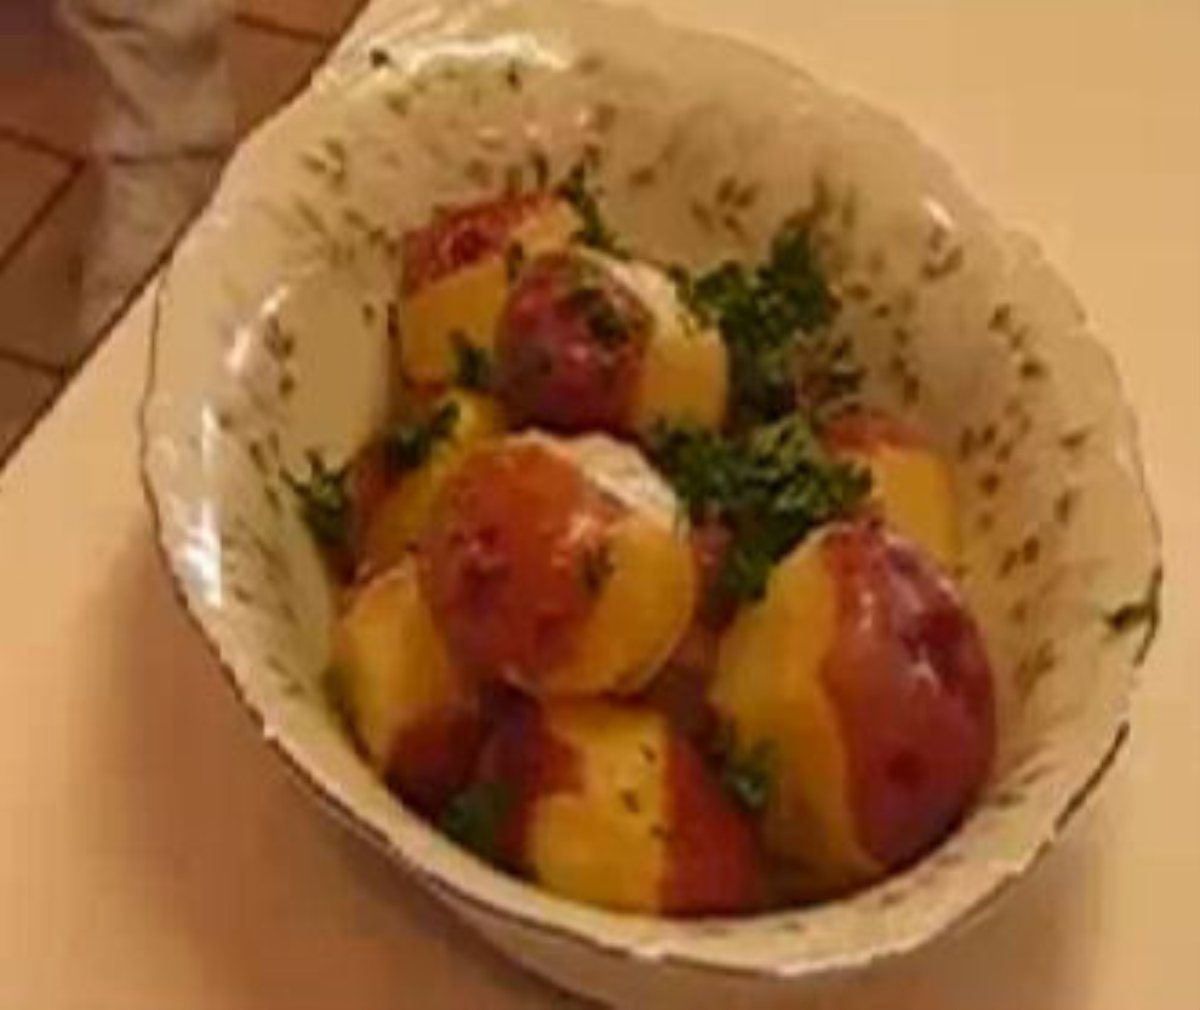 Parsley-buttered New Potatoes Recipe